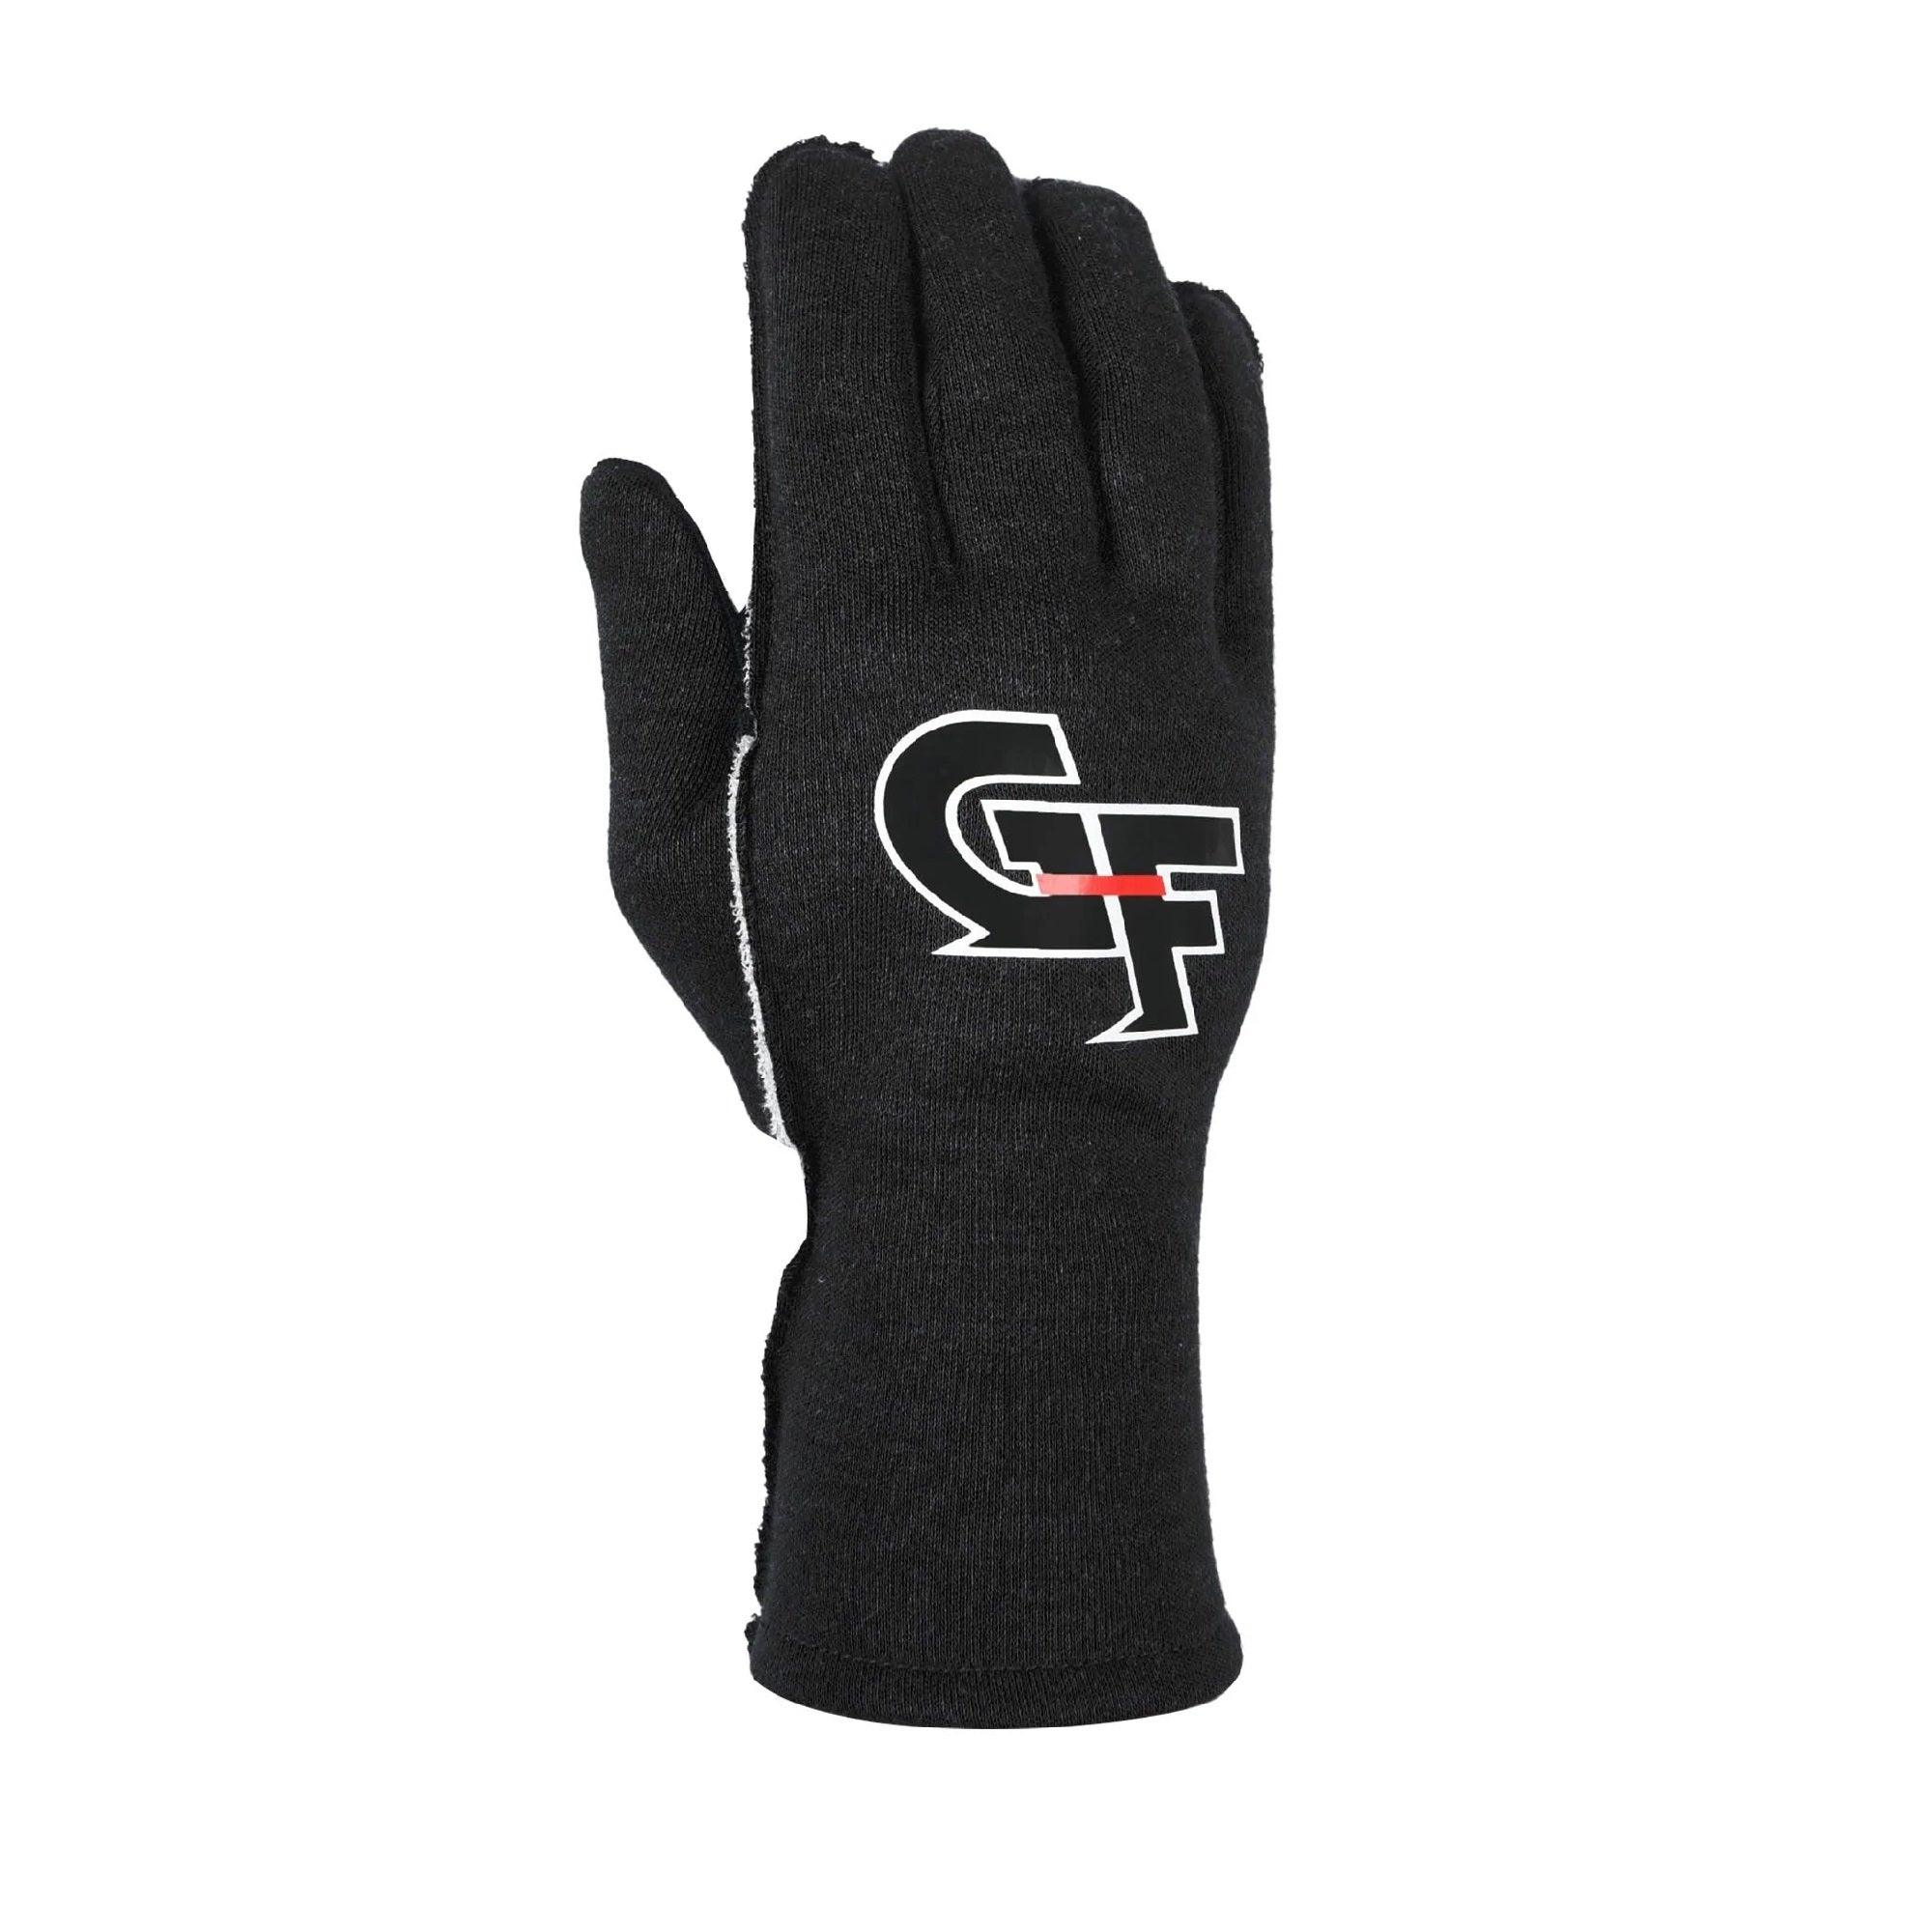 Gloves G-Limit Small Black - Burlile Performance Products